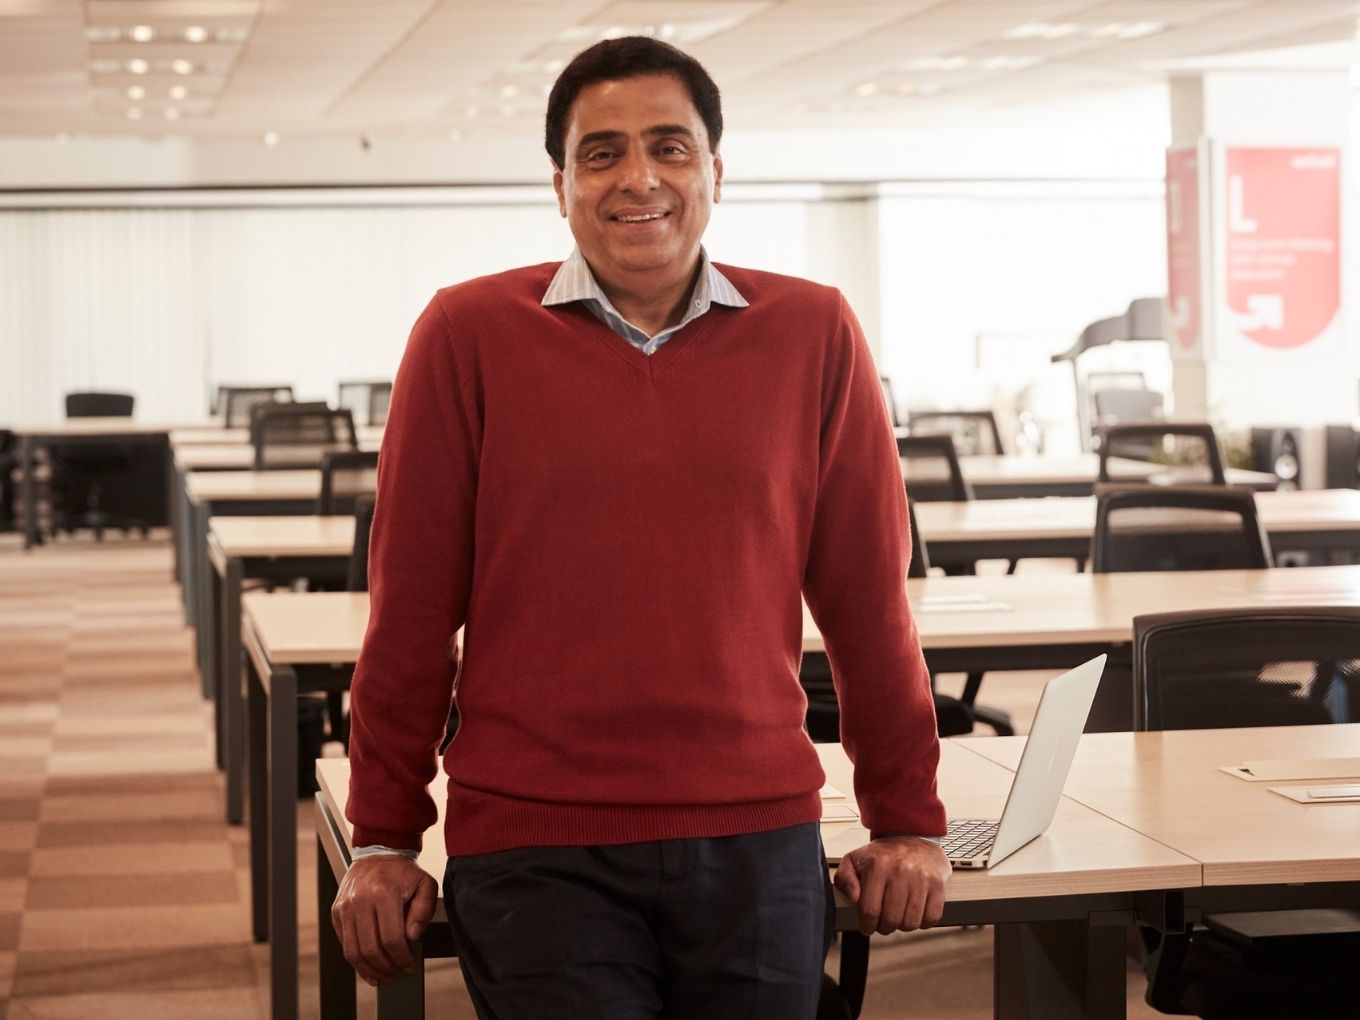 upGrad’s Ronnie Screwvala Calls A Meeting Of Edtech Founders To Discuss ‘Core Issues’